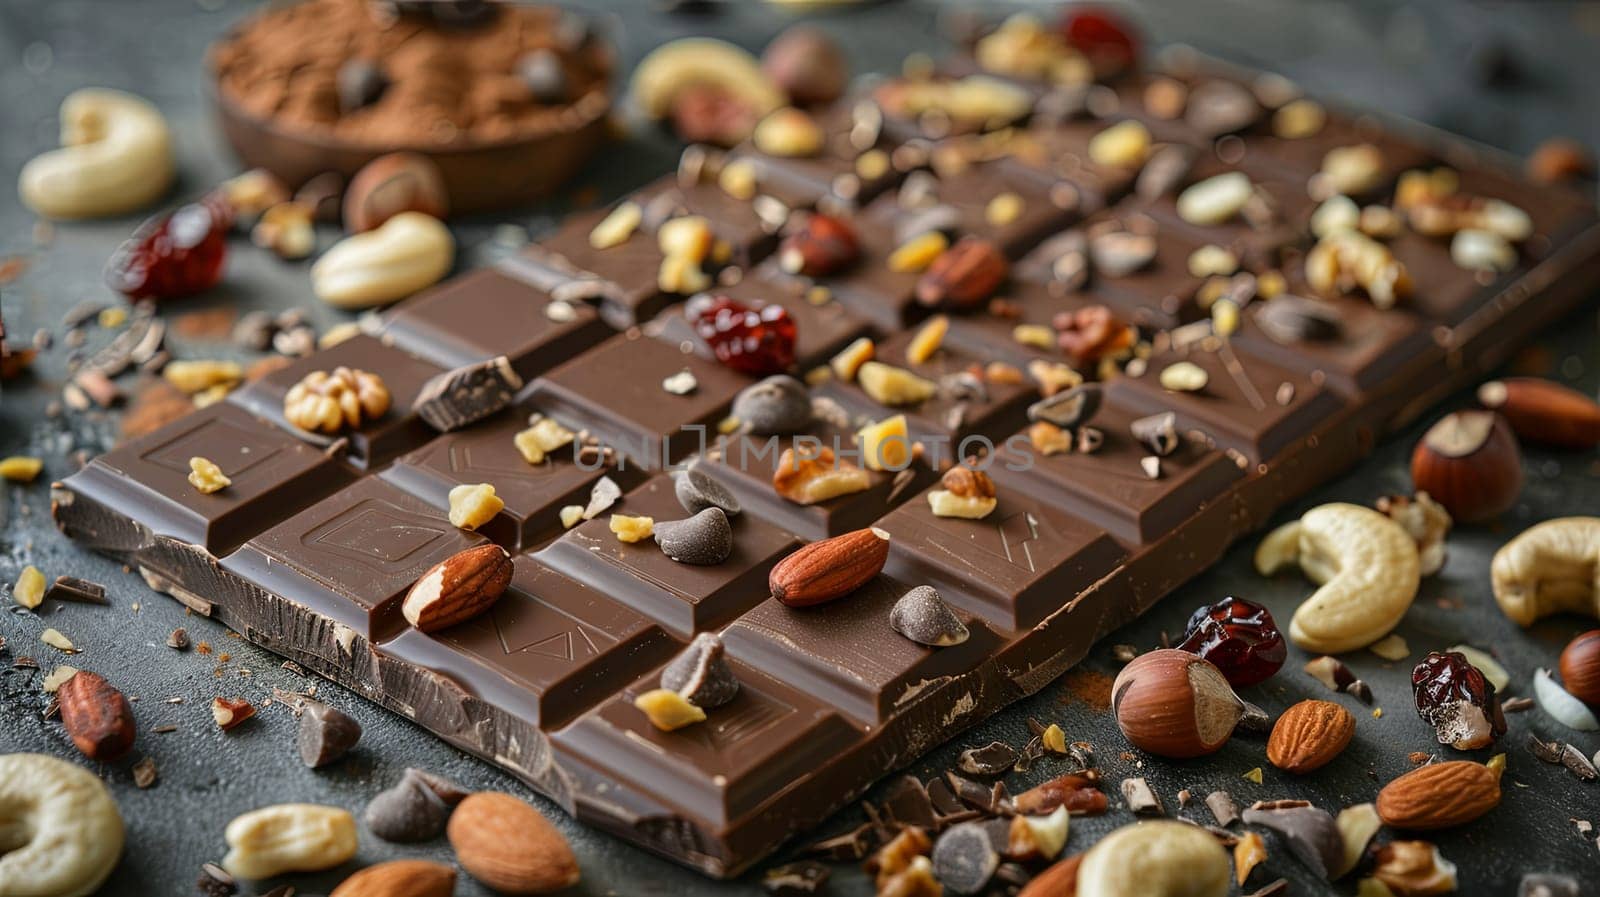 A chocolate bar with nuts and chocolate pieces scattered on a table, showcasing rich textures and natural ingredients.